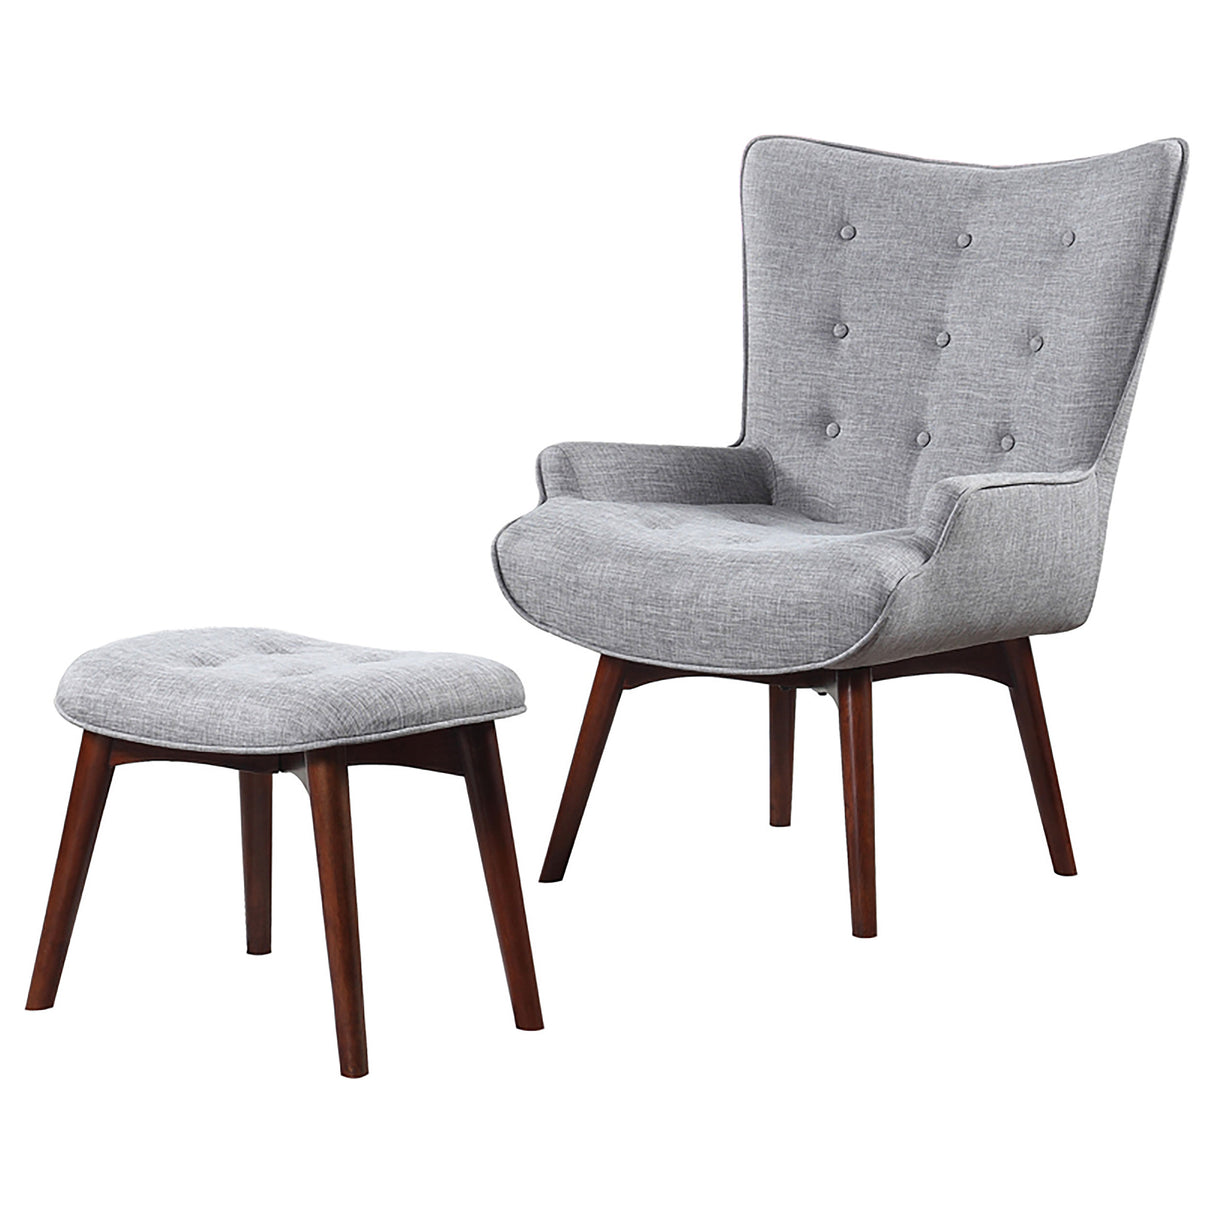 Accent Chair W/ Ottoman - Willow Upholstered Accent Chair with Ottoman Grey and Brown